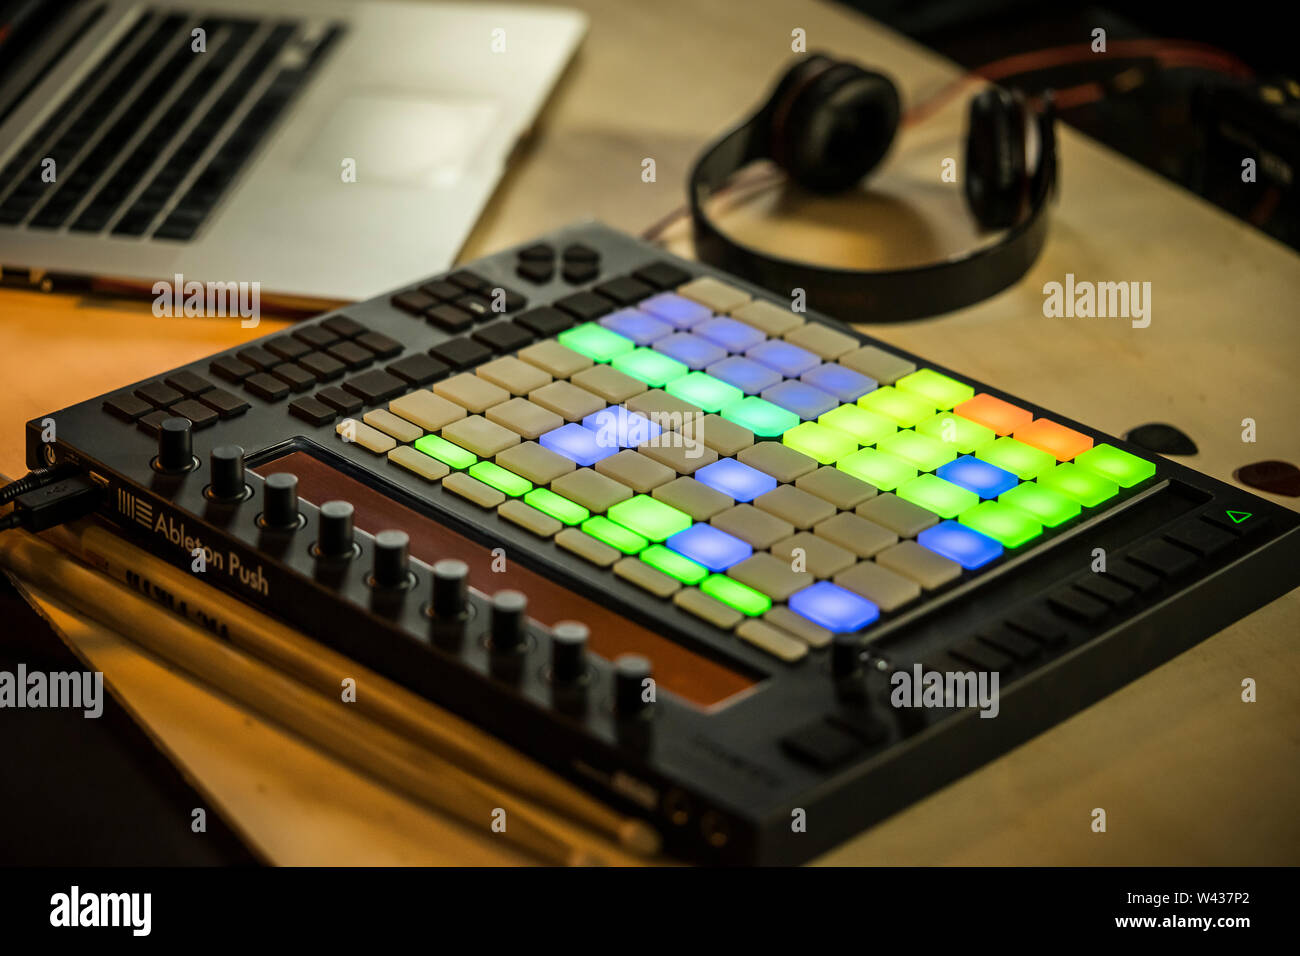 Home music production. An Ableton Push midi pad controller with Macbook and Headphones Stock Photo